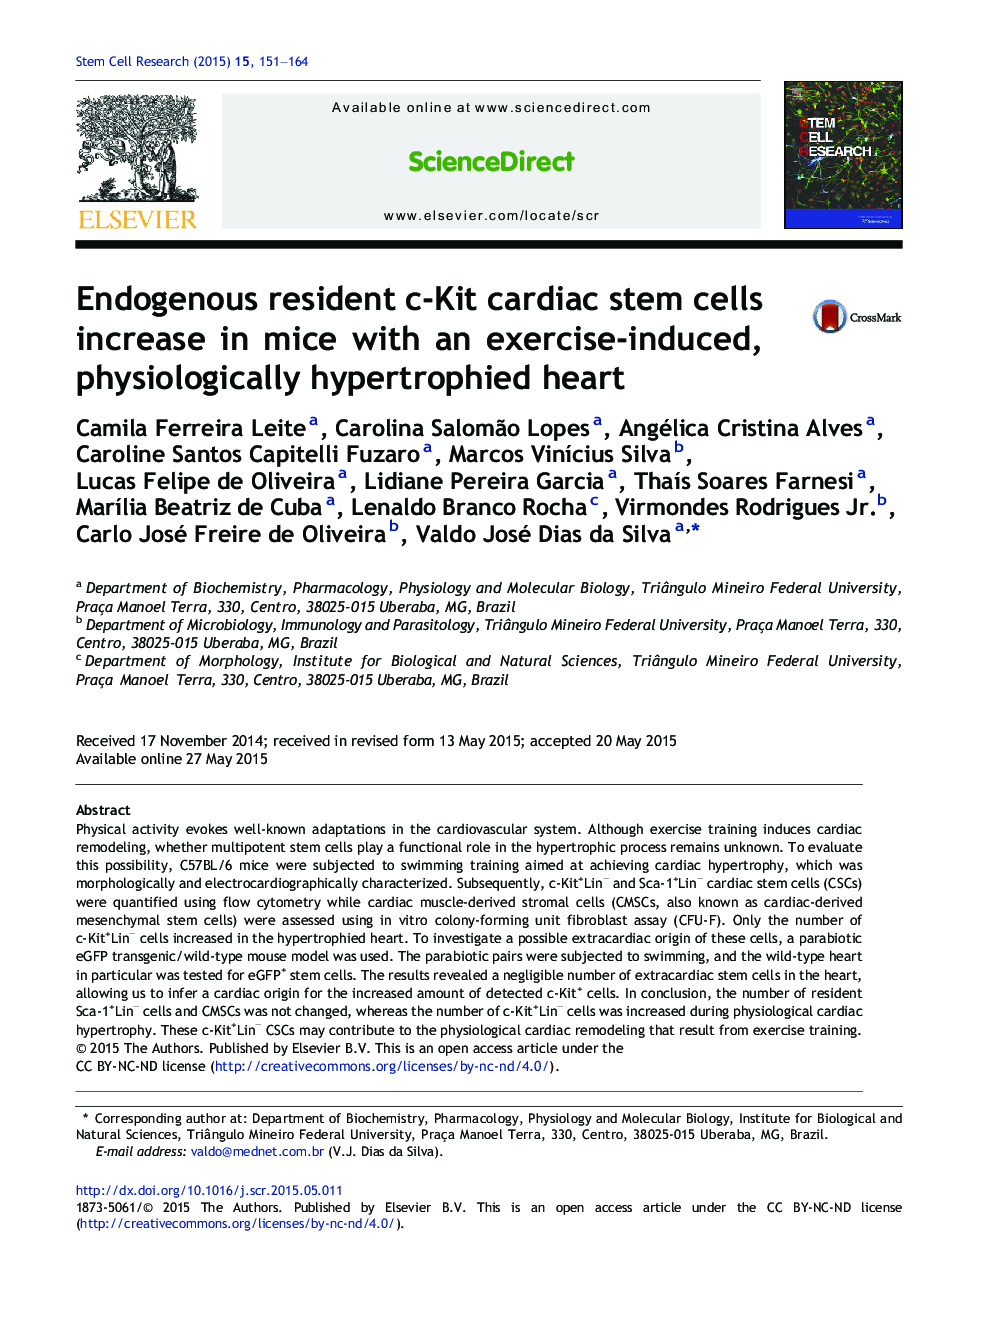 Endogenous resident c-Kit cardiac stem cells increase in mice with an exercise-induced, physiologically hypertrophied heart